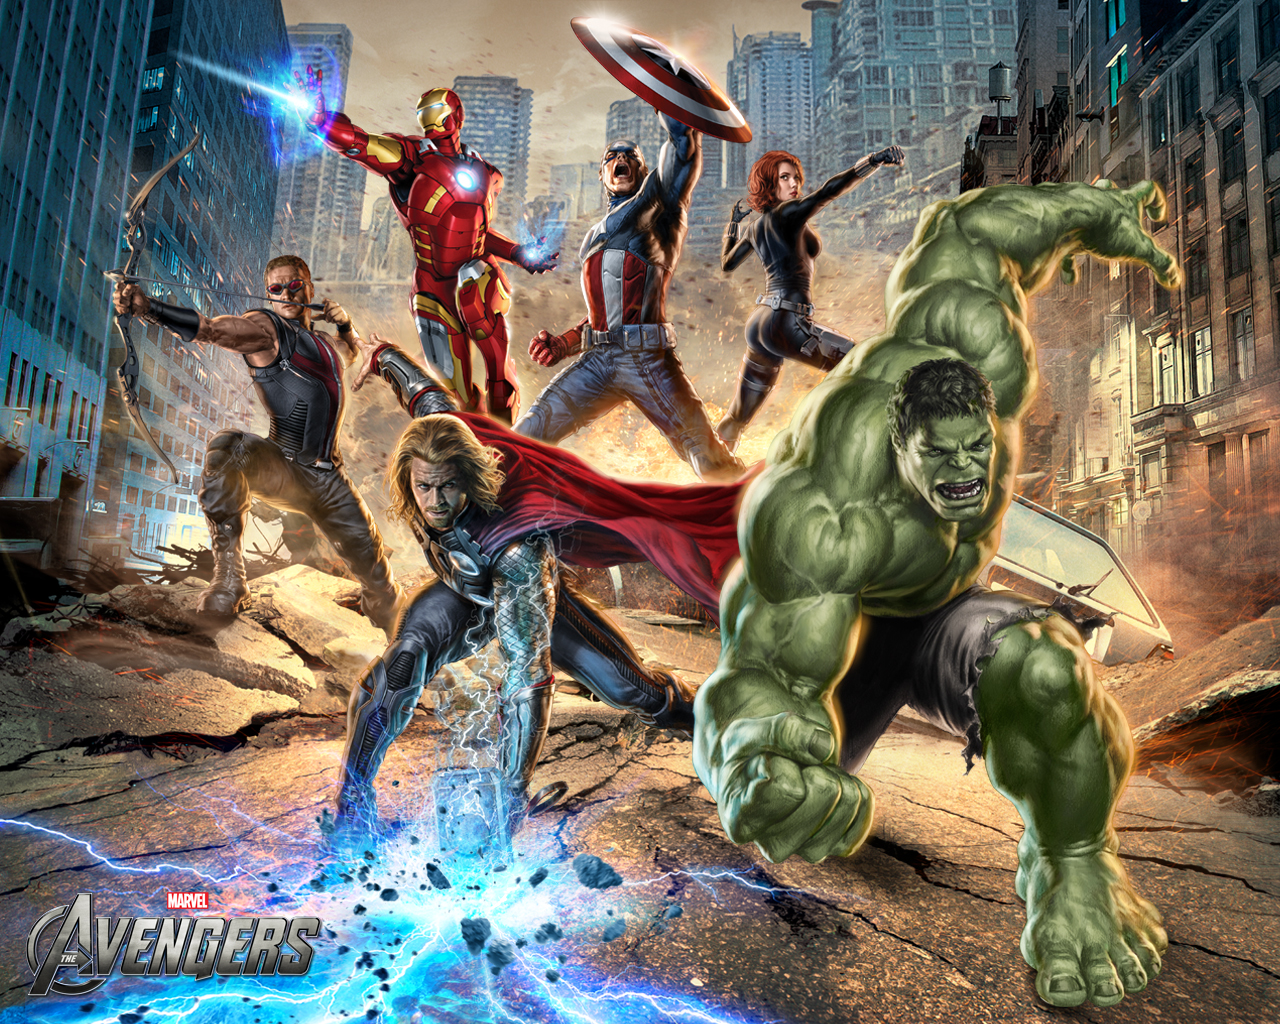 The Avengers Minute Long TV Spot and More Wallpapers - Comic Vine